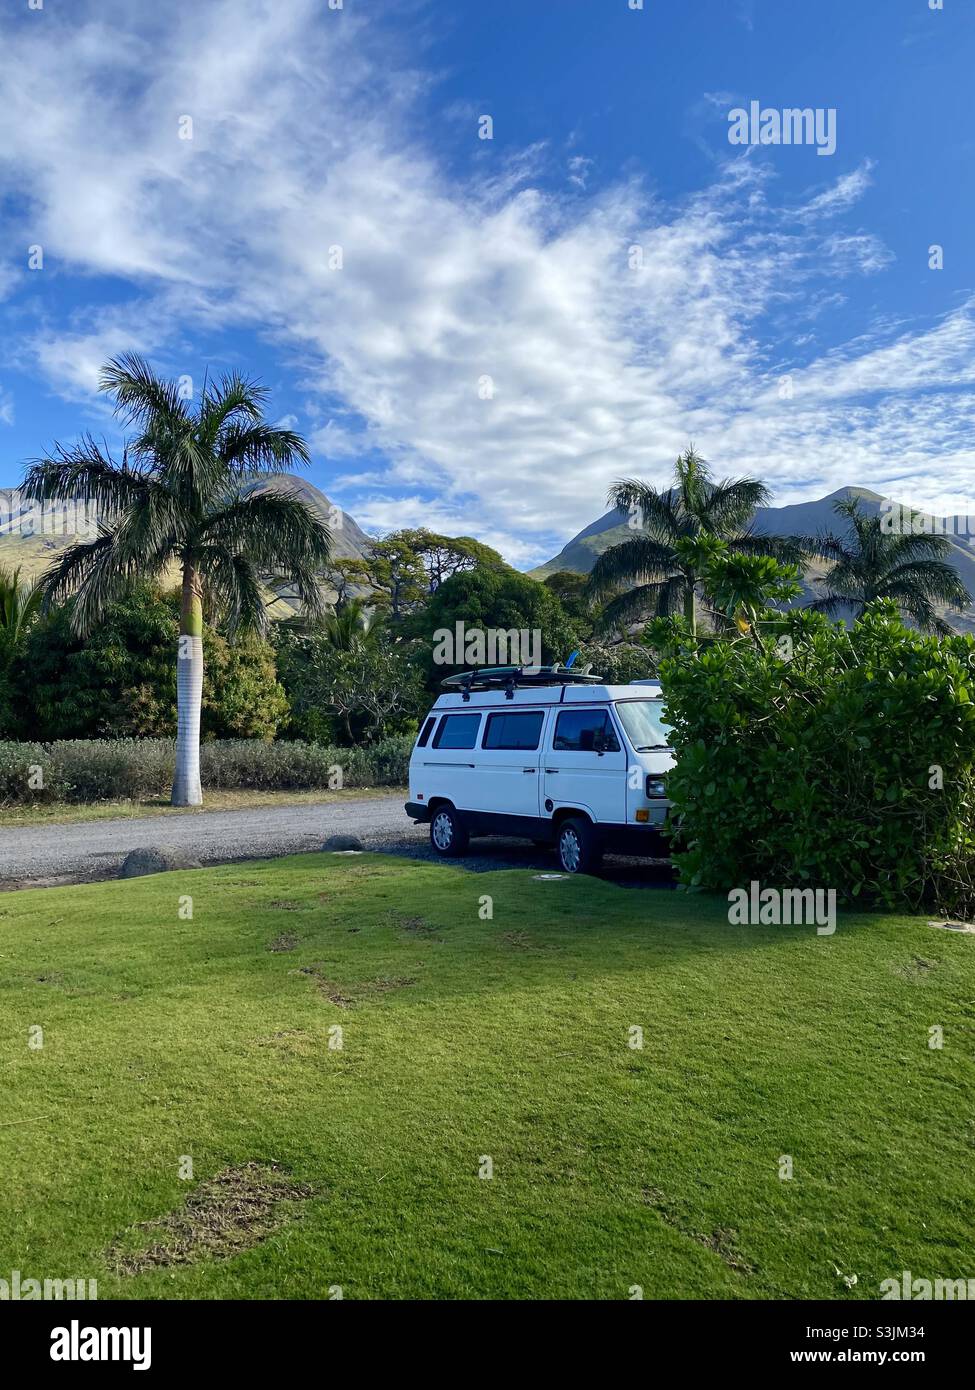 VW van parked in front of Maui mountains surrounded by palm trees. Stock Photo